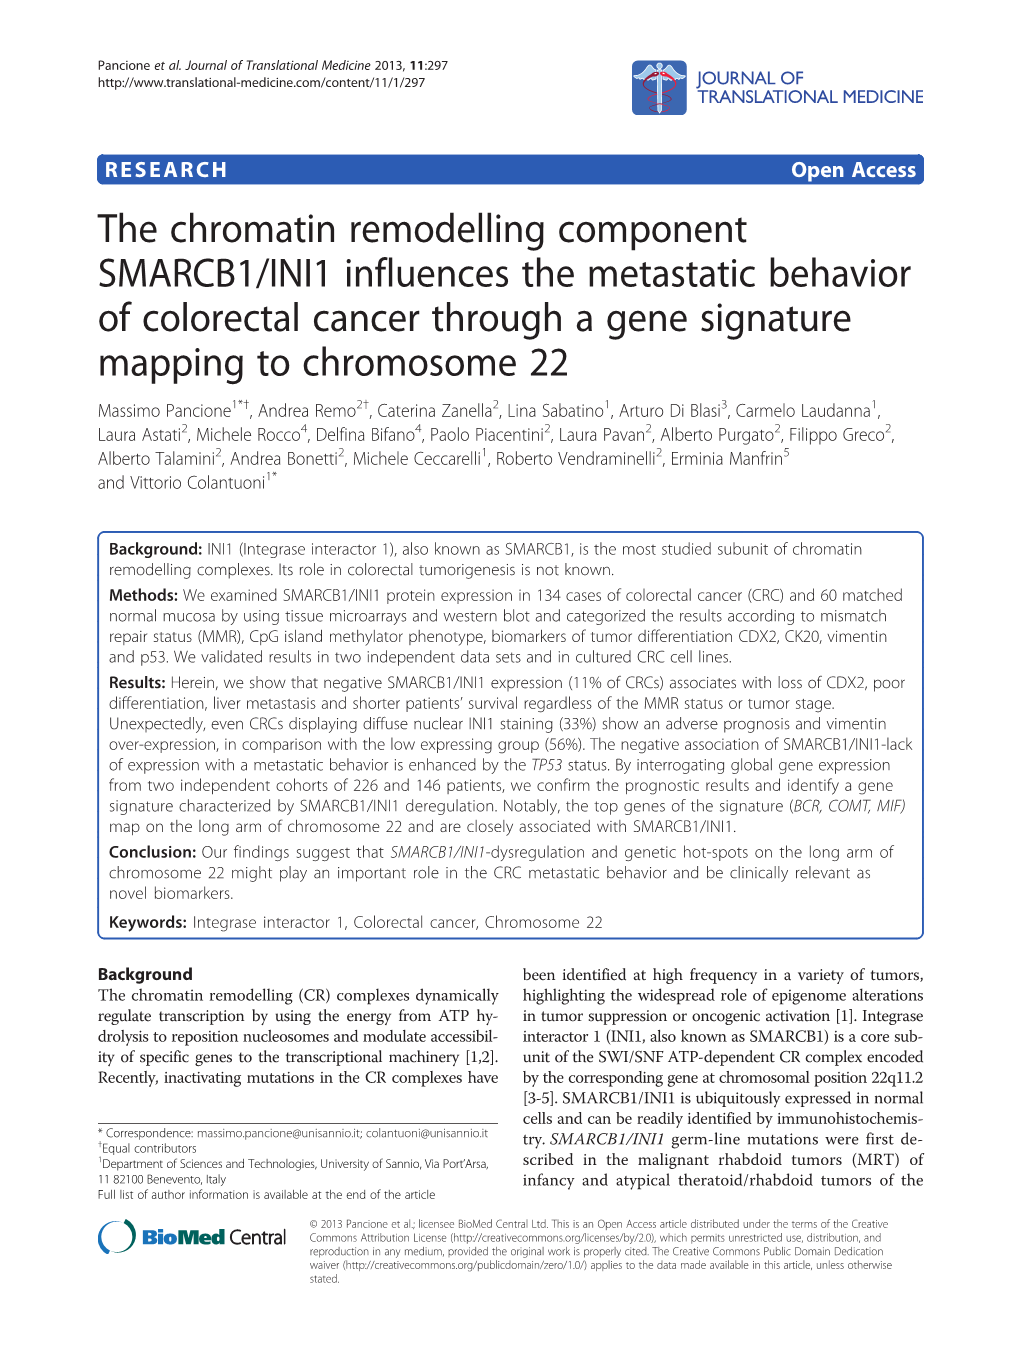 The Chromatin Remodelling Component SMARCB1/INI1